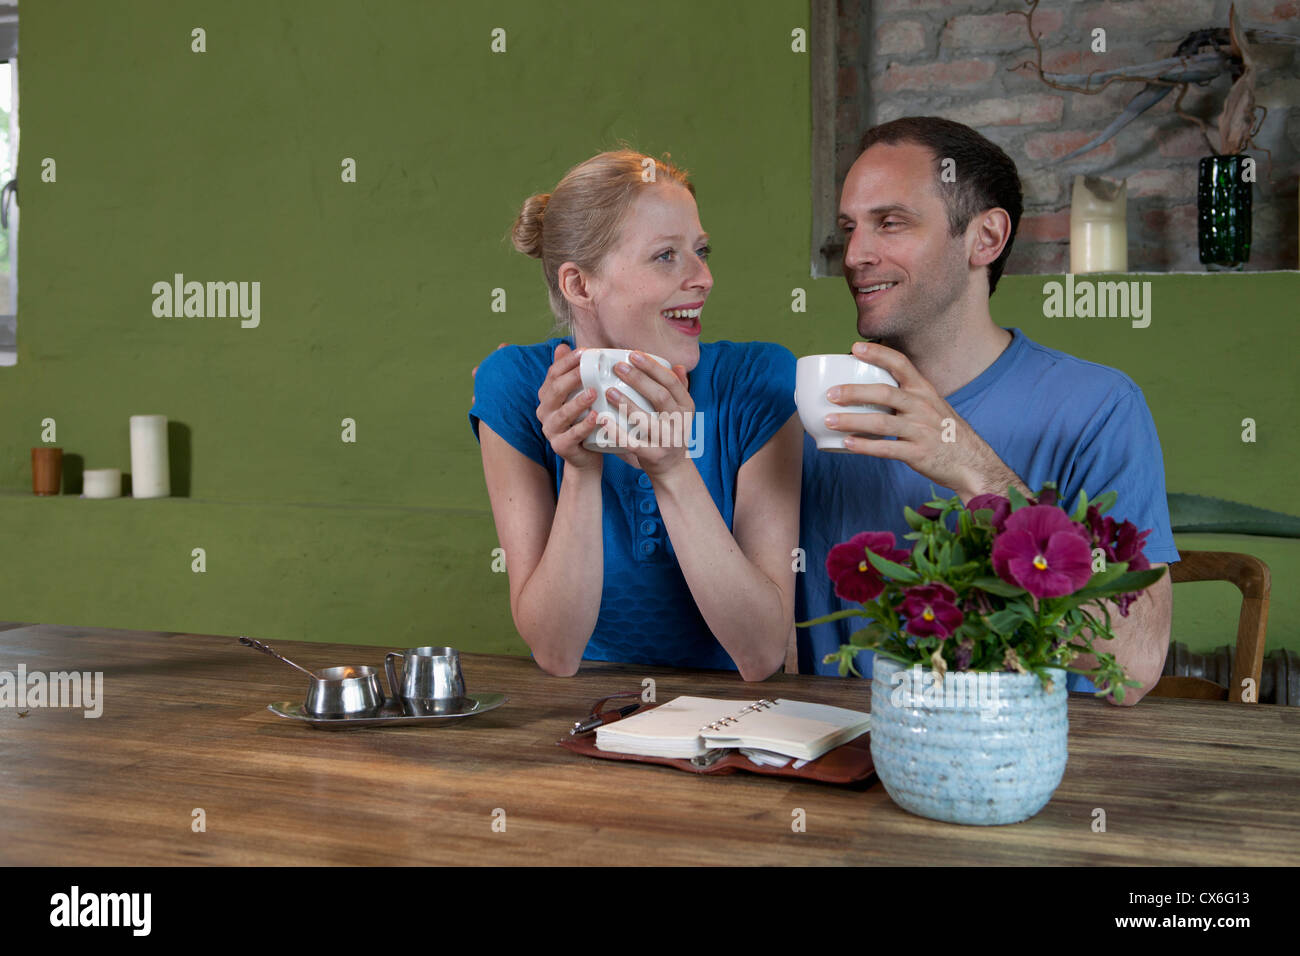 A couple sitting at a dining table with a personal organizer, talking excitedly Stock Photo